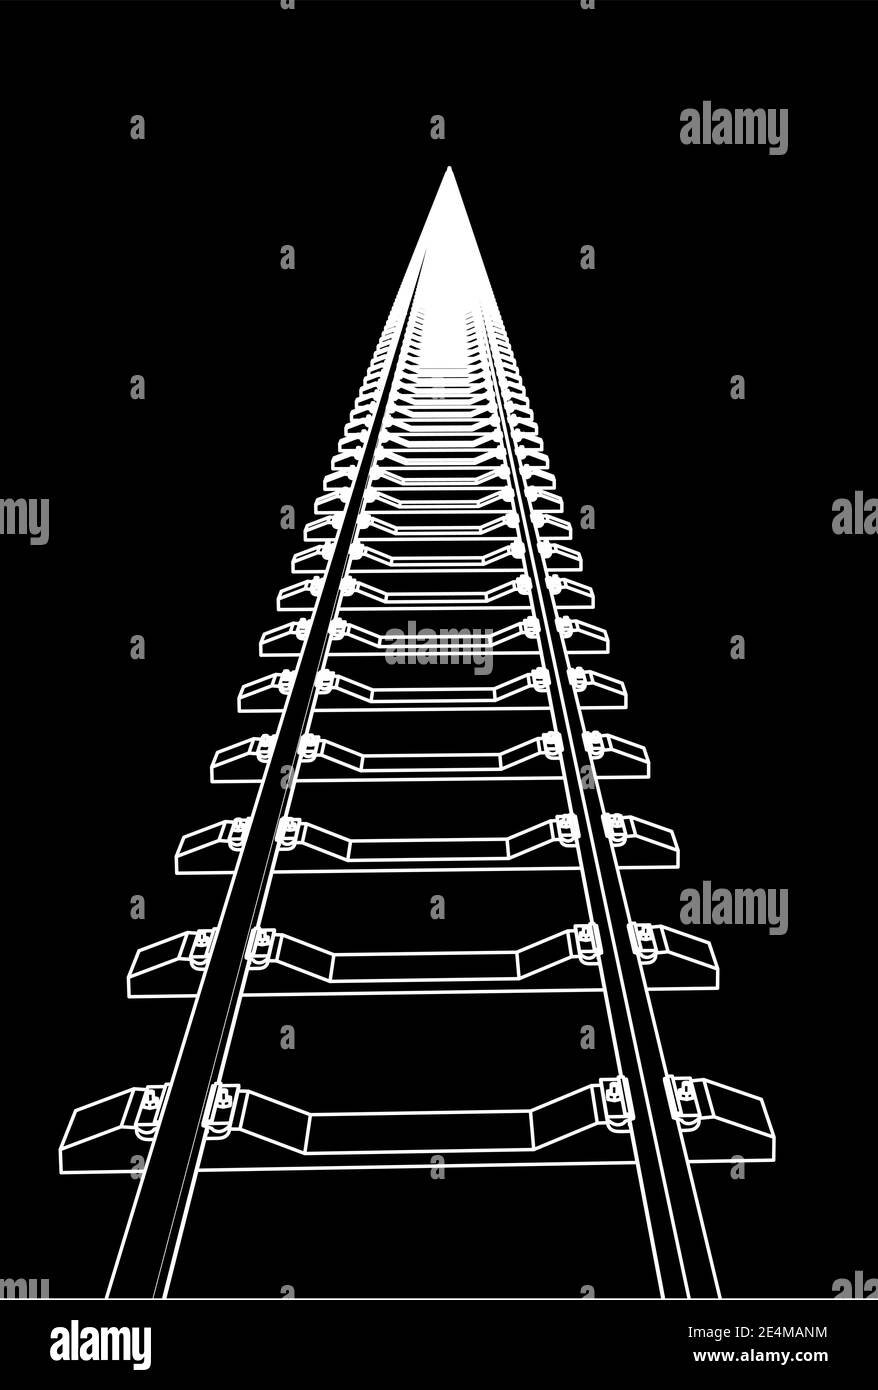 The railway going forward. 3d vector illustration on a black background. Stock Vector